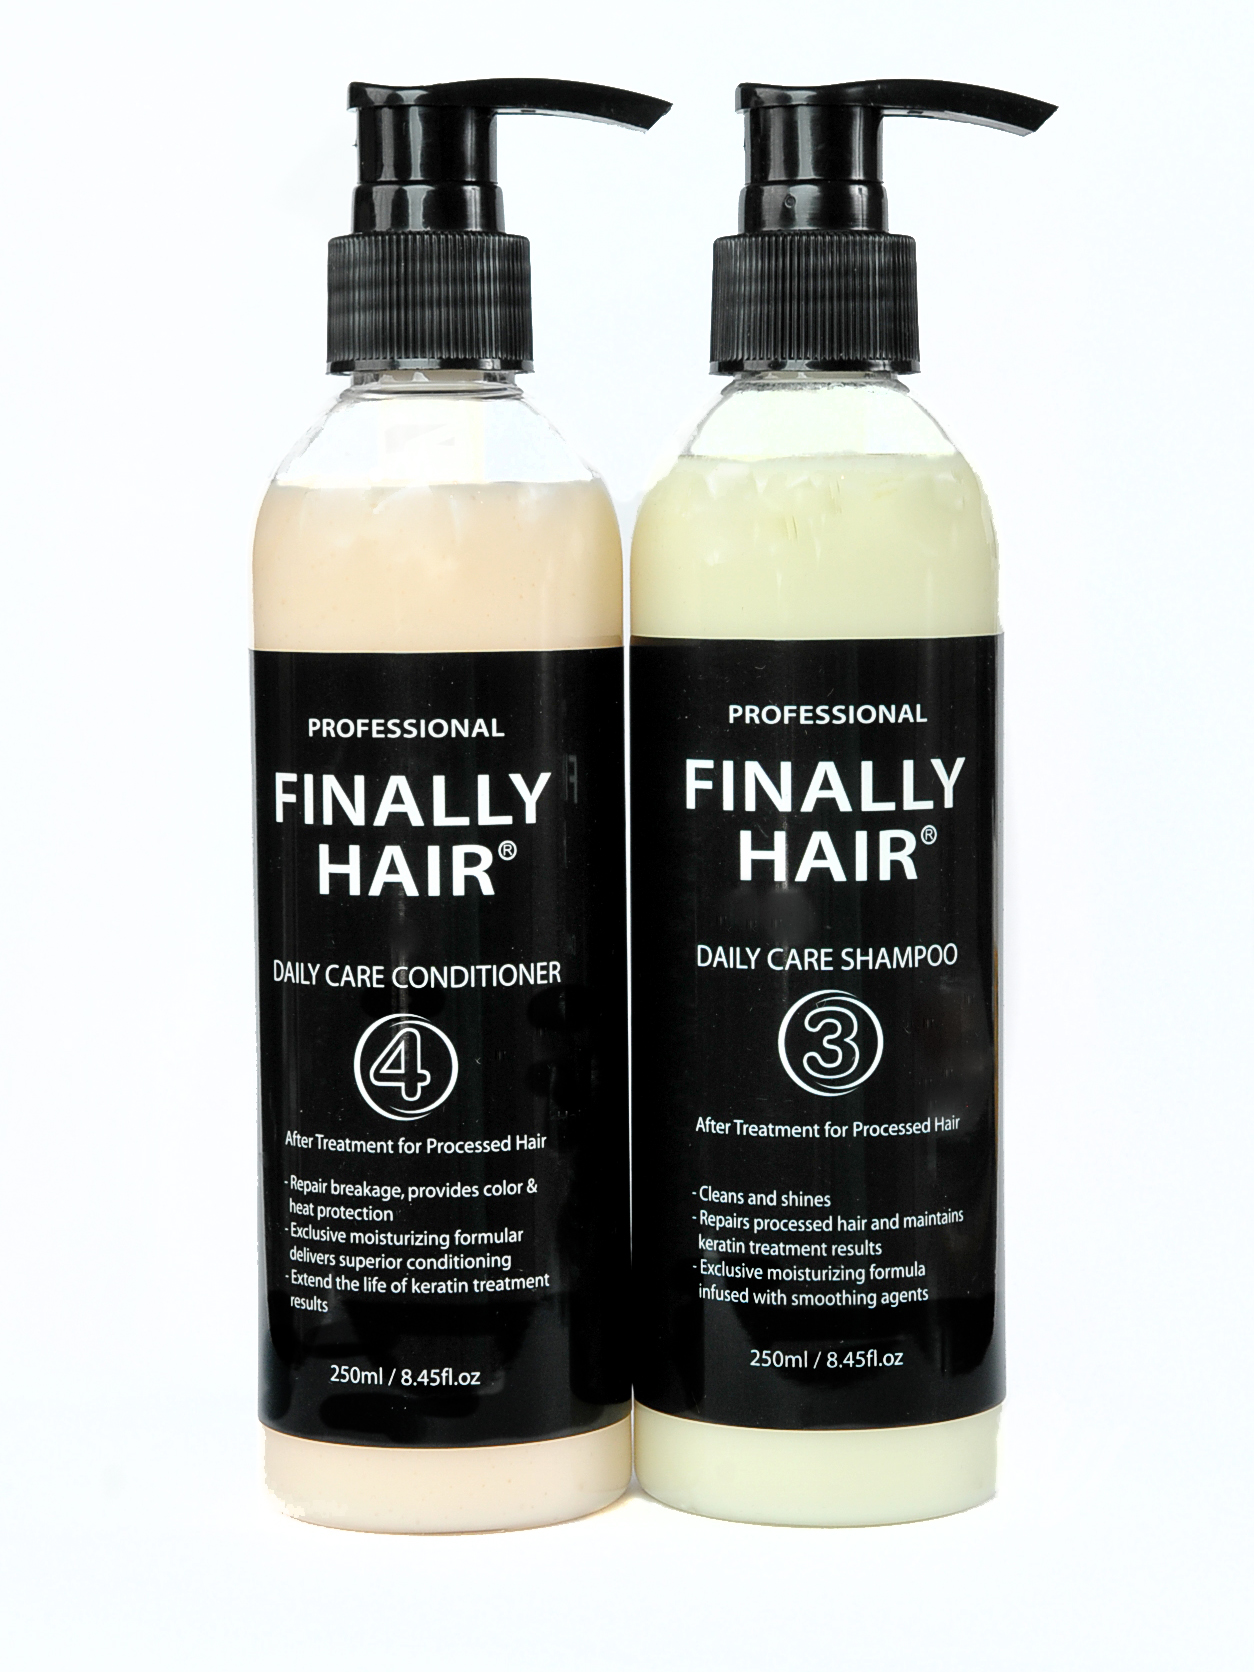 Sulfate Free Shampoo & Conditioner For Permed/Straightened Hair